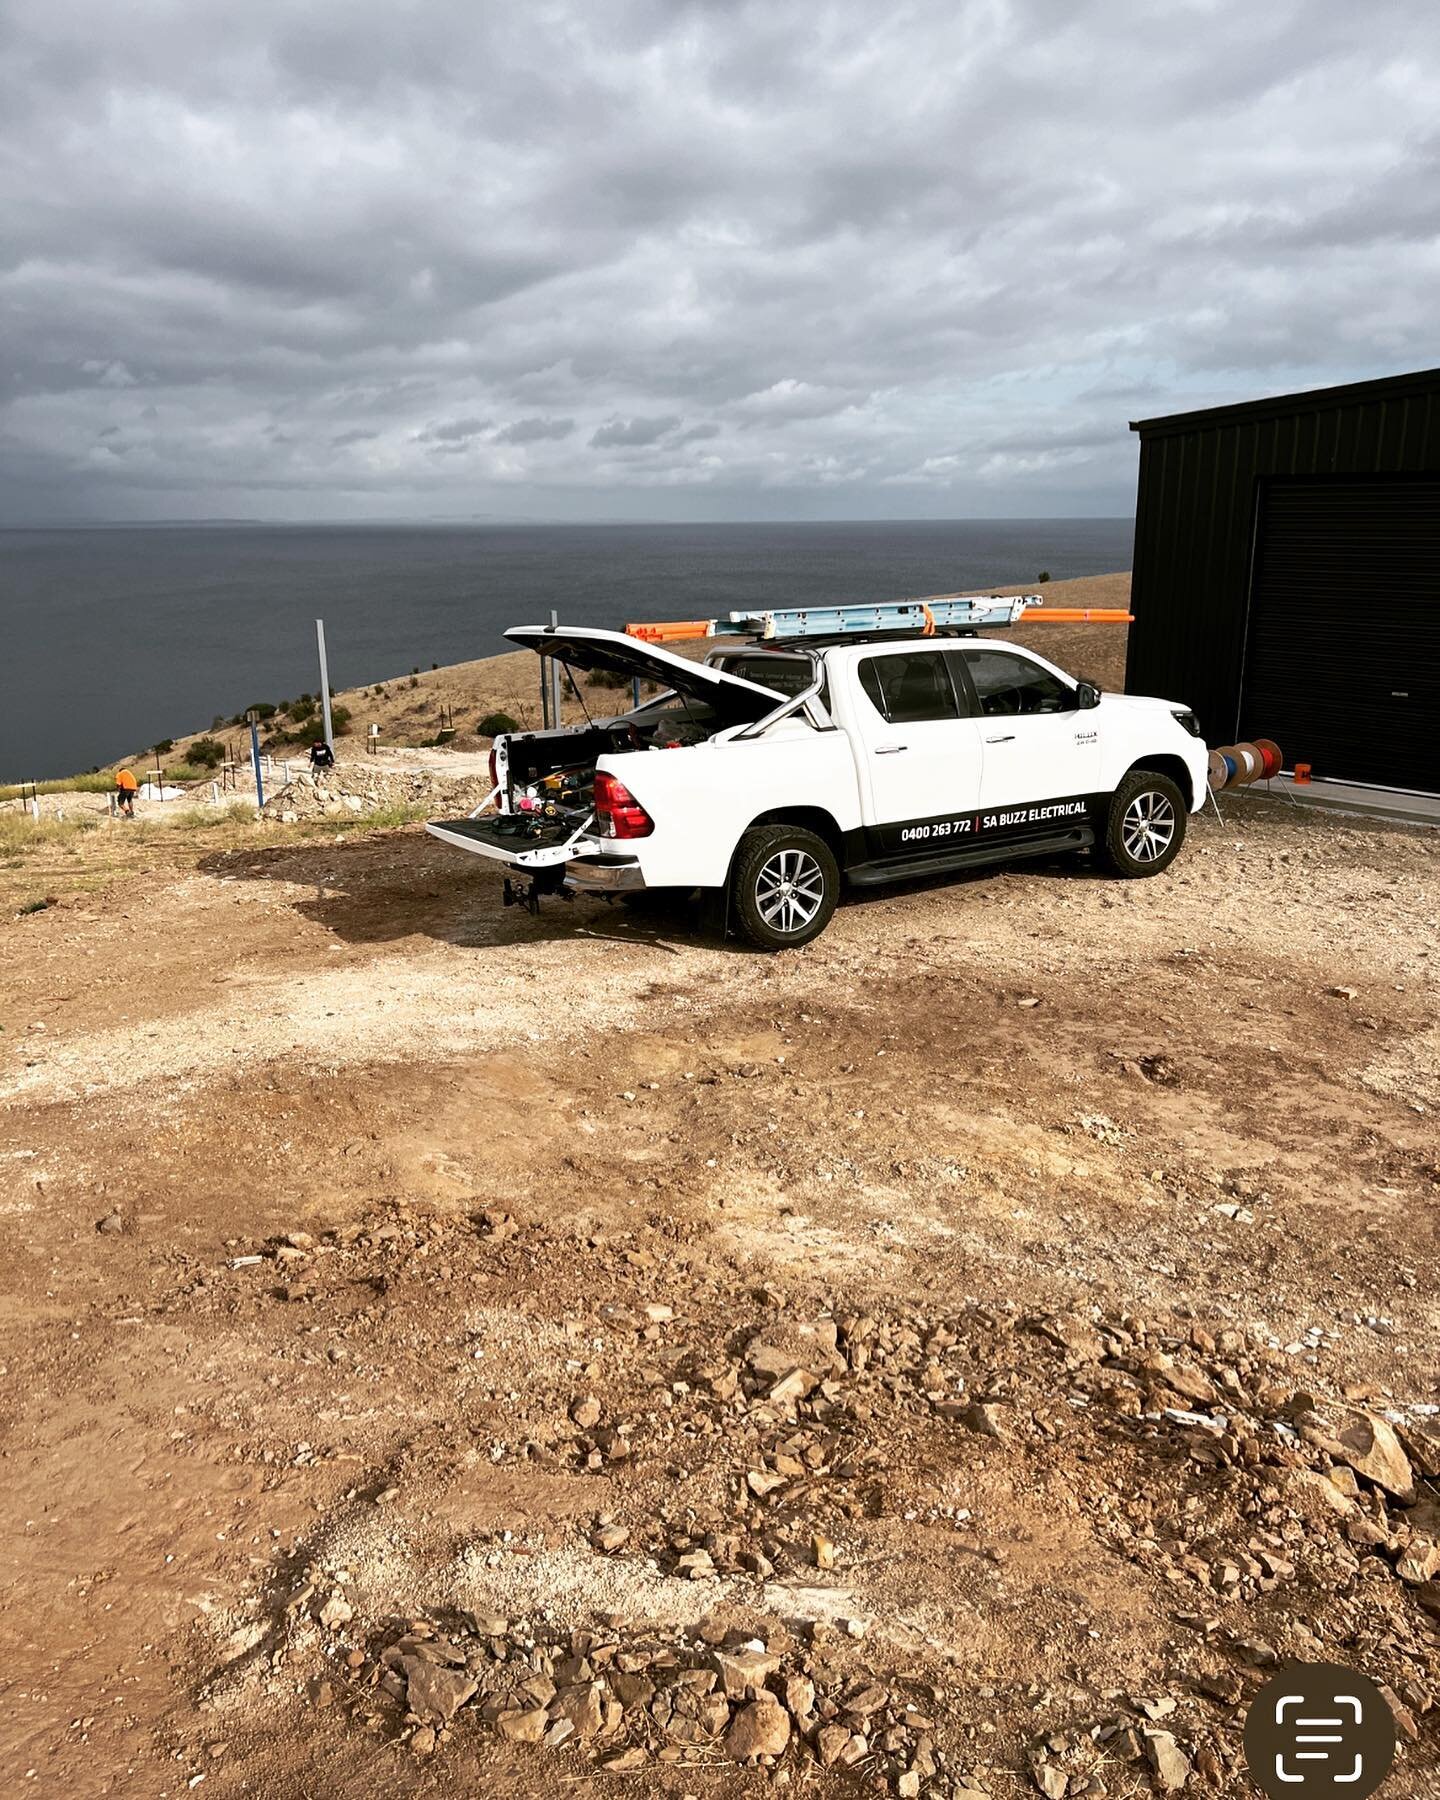 New off grid build on KI starting&hellip;.. sweet view &hellip;. Cracking location &hellip;. Looking forward to this pad coming to life &hellip;.